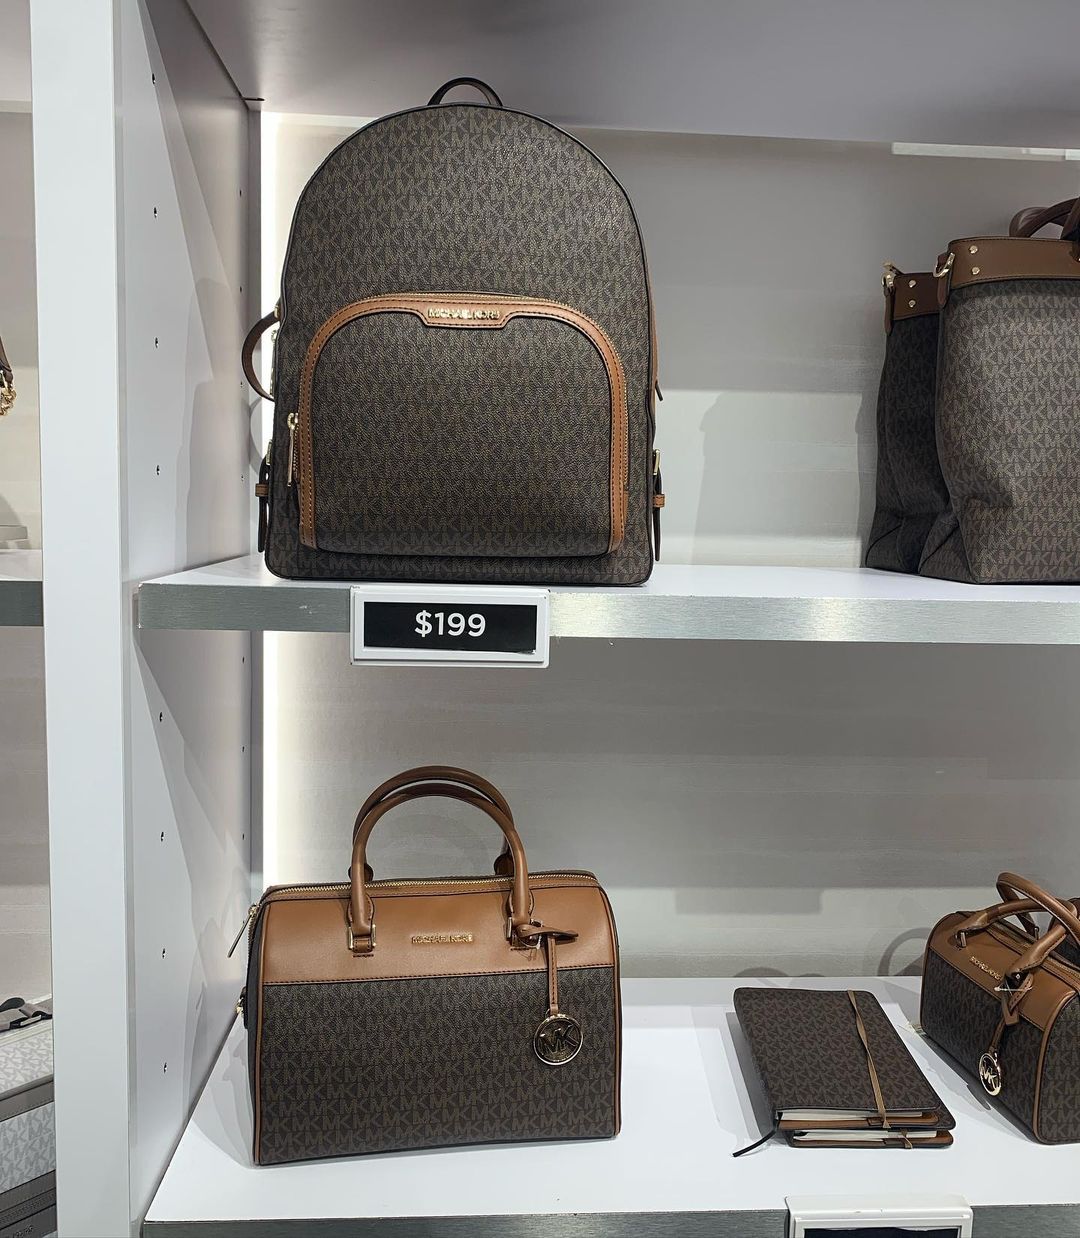 Michael Kors Outlet - Bags and Accessories Store at Orlando Premium Outlets